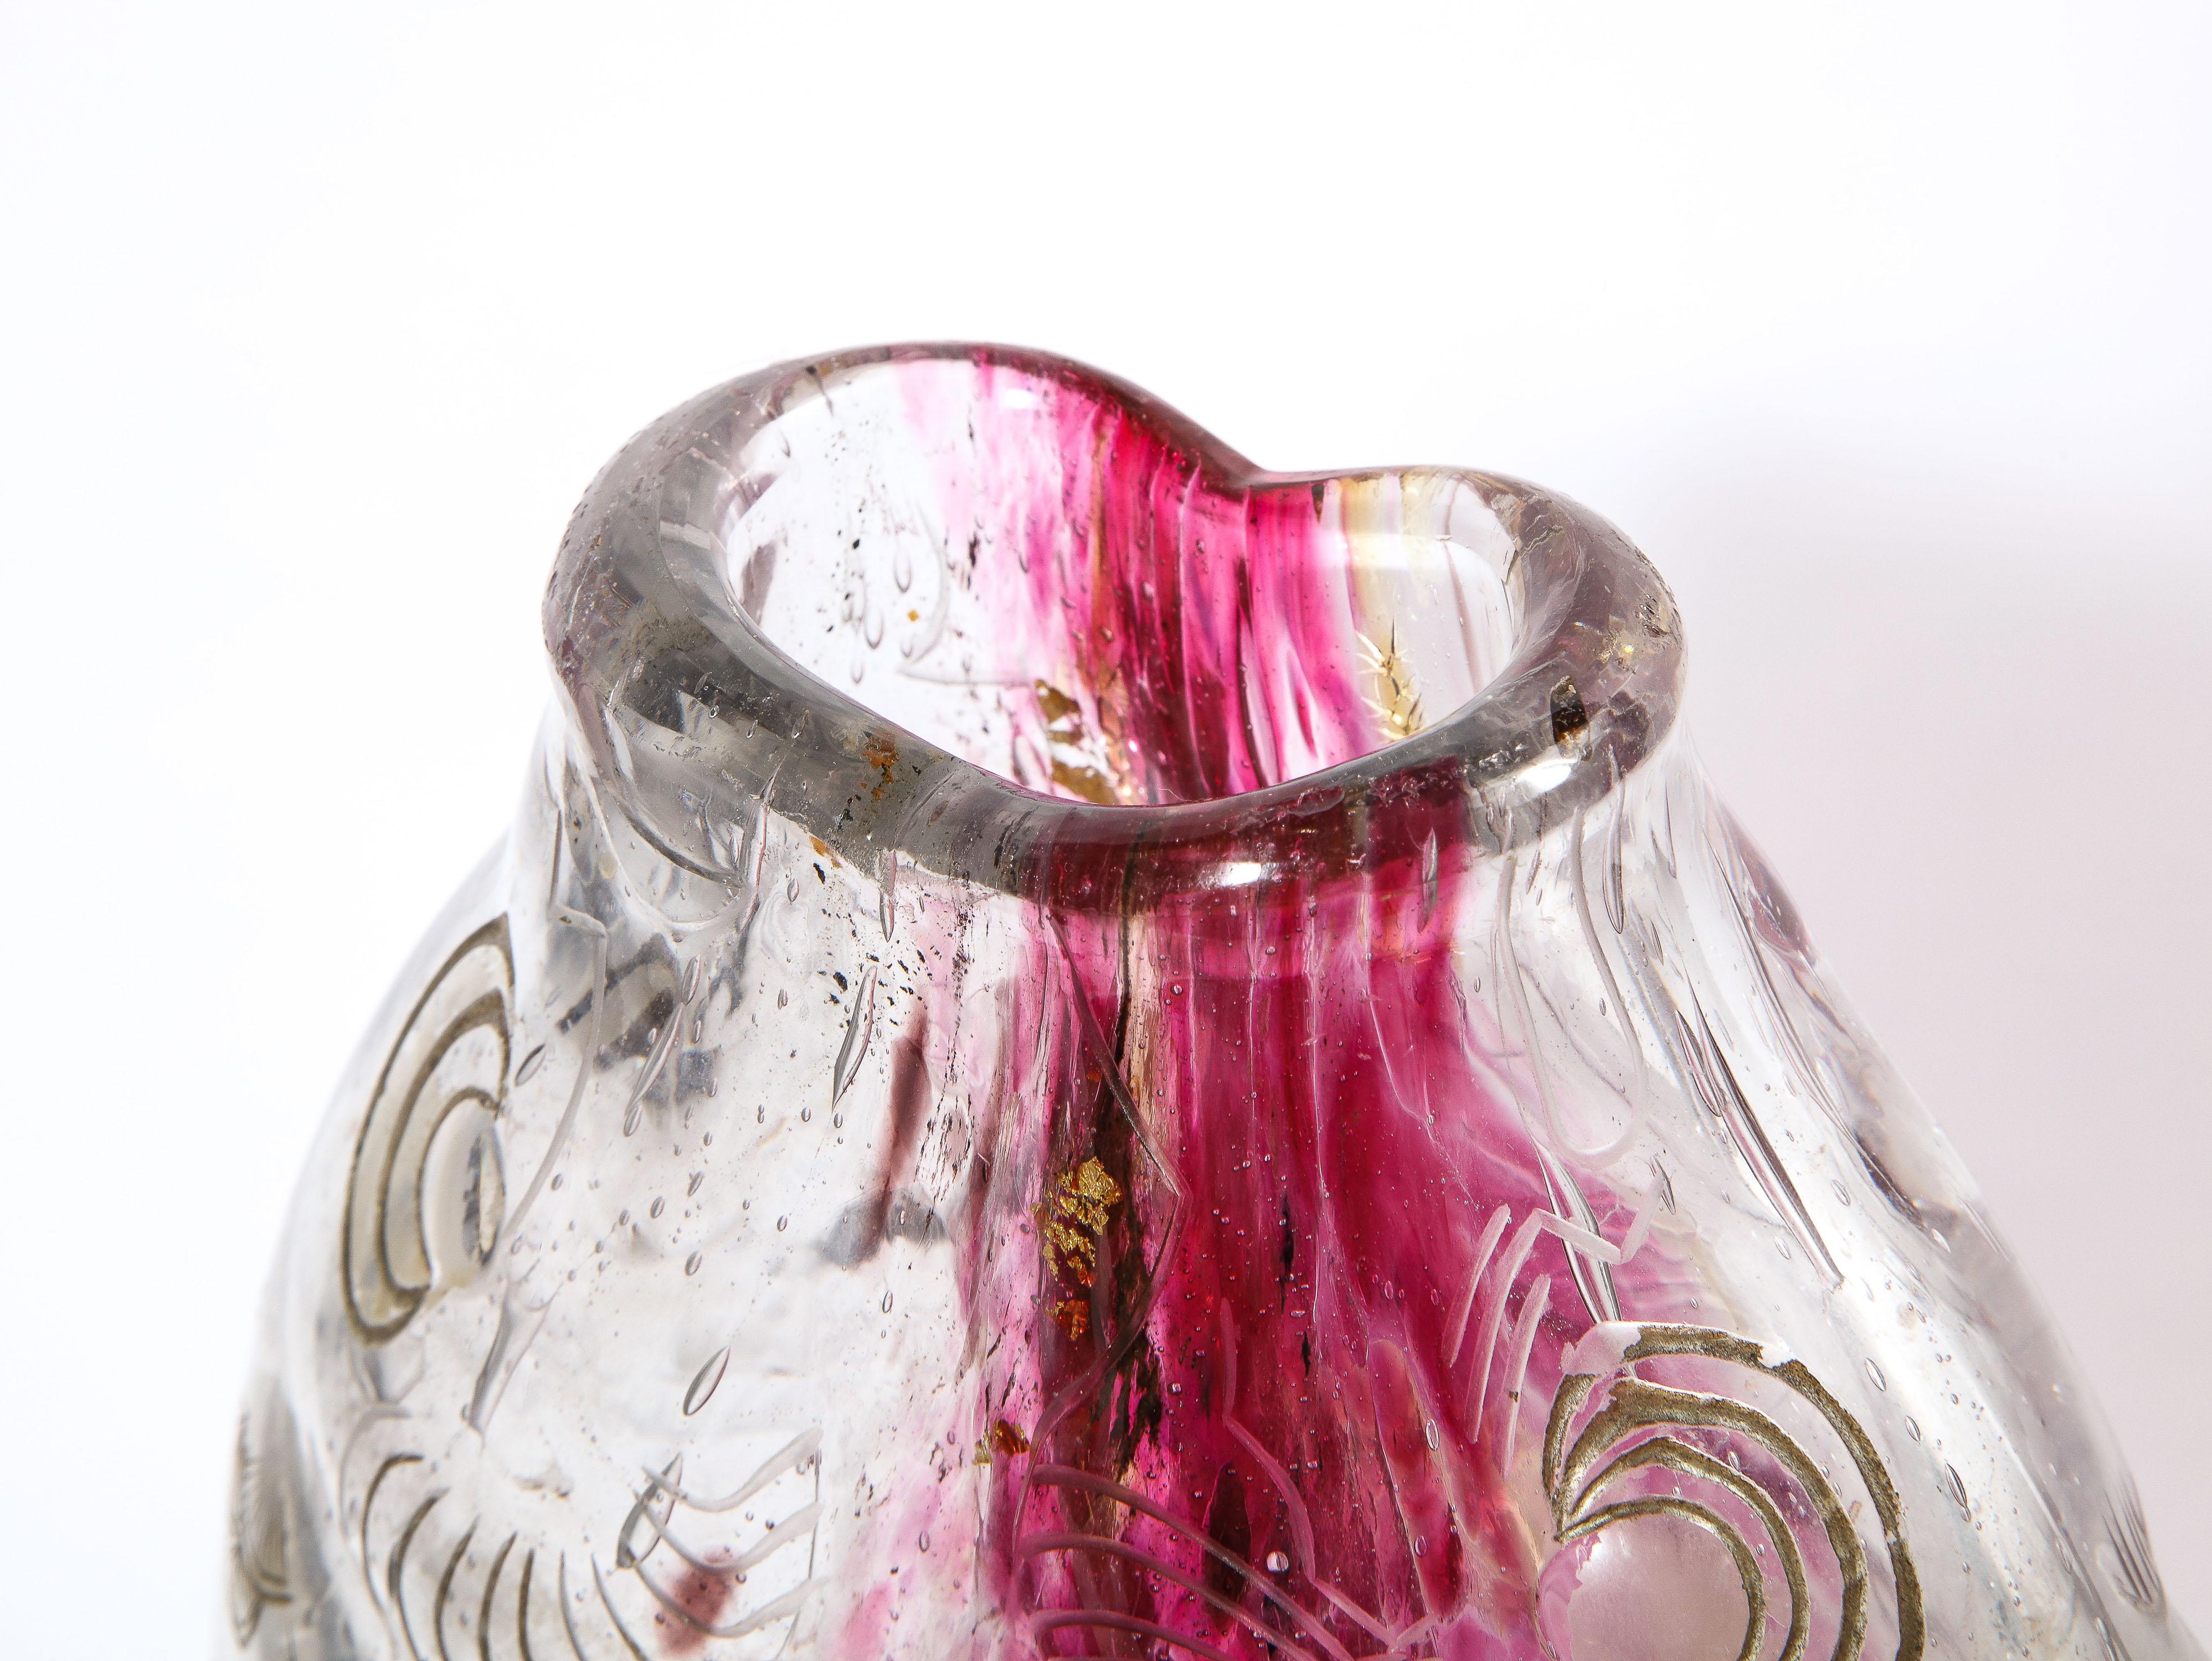 Emile Galle, A Rare & Important Ormolu-Mounted Double Carp Fish Pink-Glass Vase For Sale 10